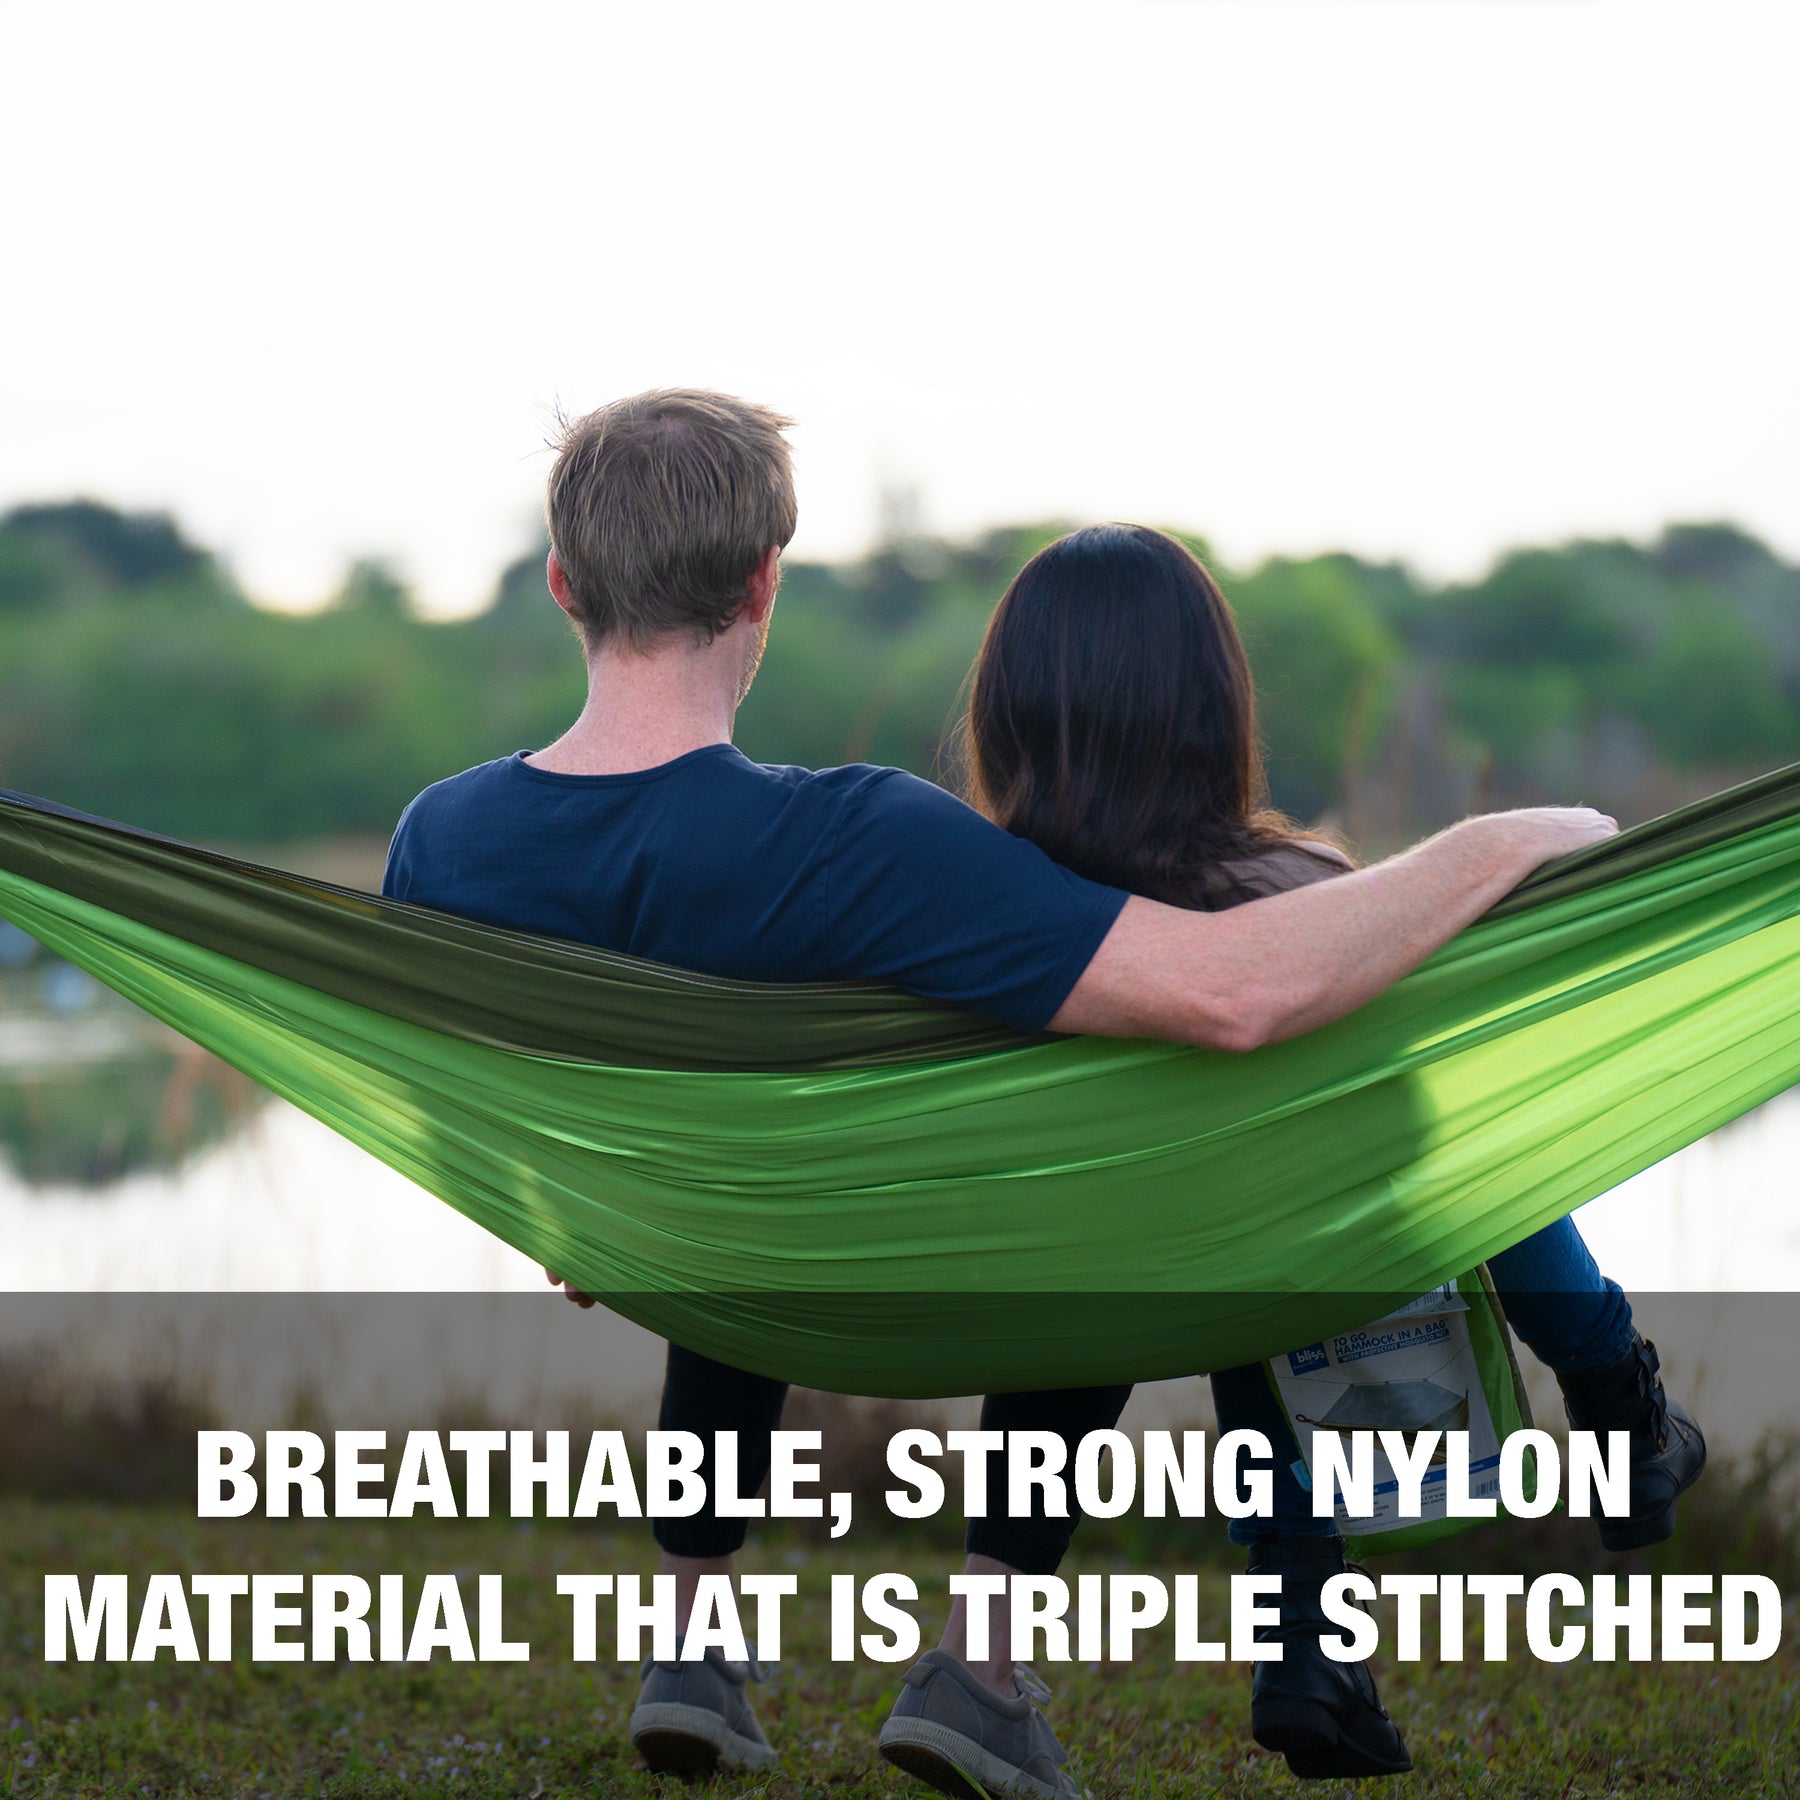 Has breathable, strong nylon material that is triple stitched.